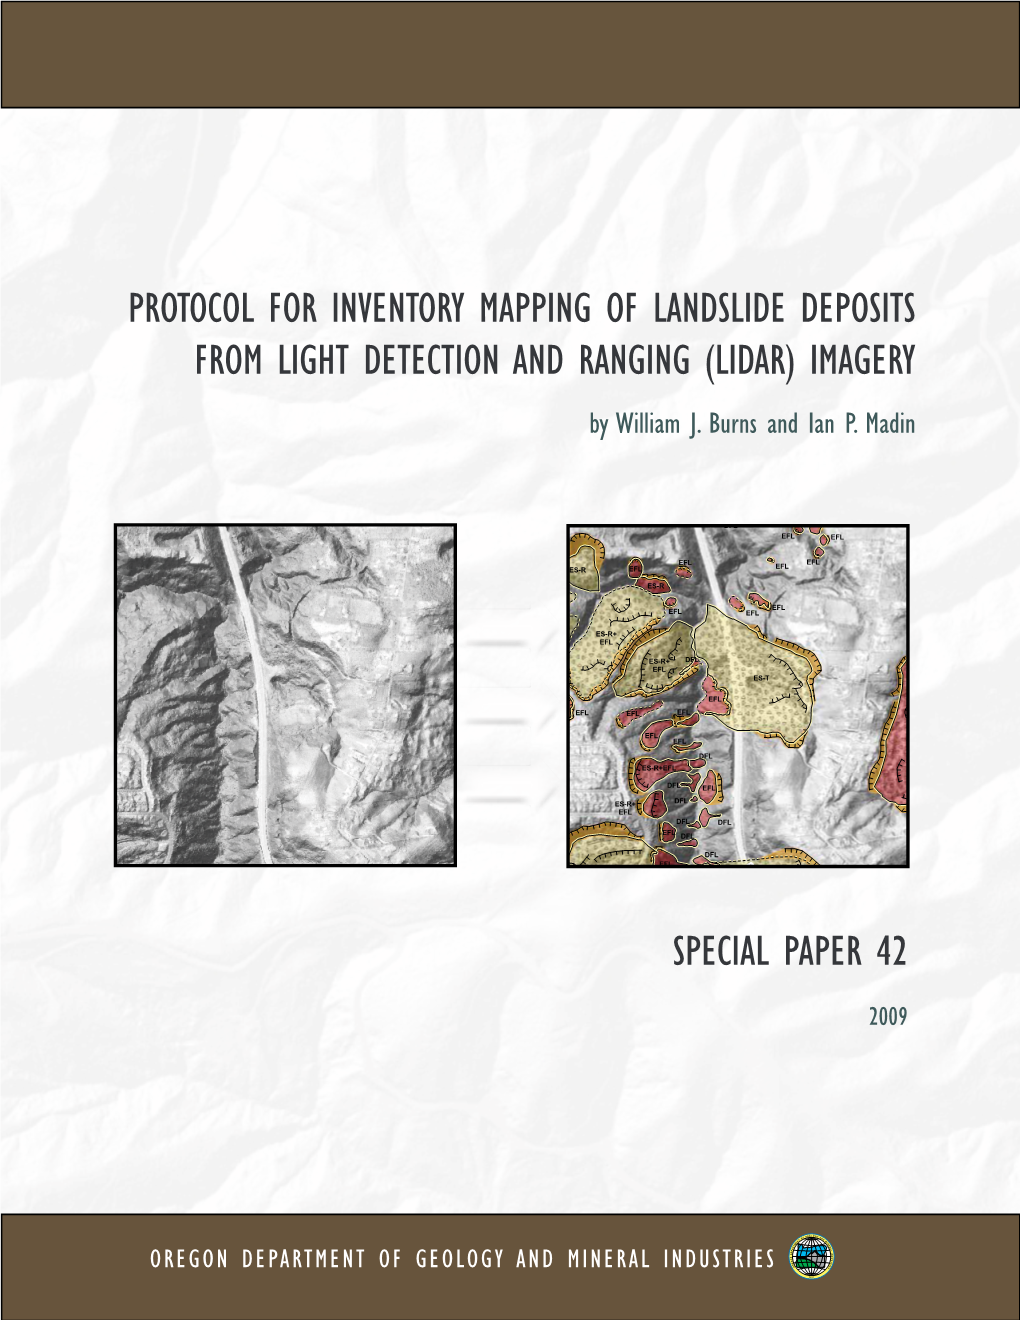 DOGAMI Special Paper 42, Protocol for Inventory Mapping of Landslide